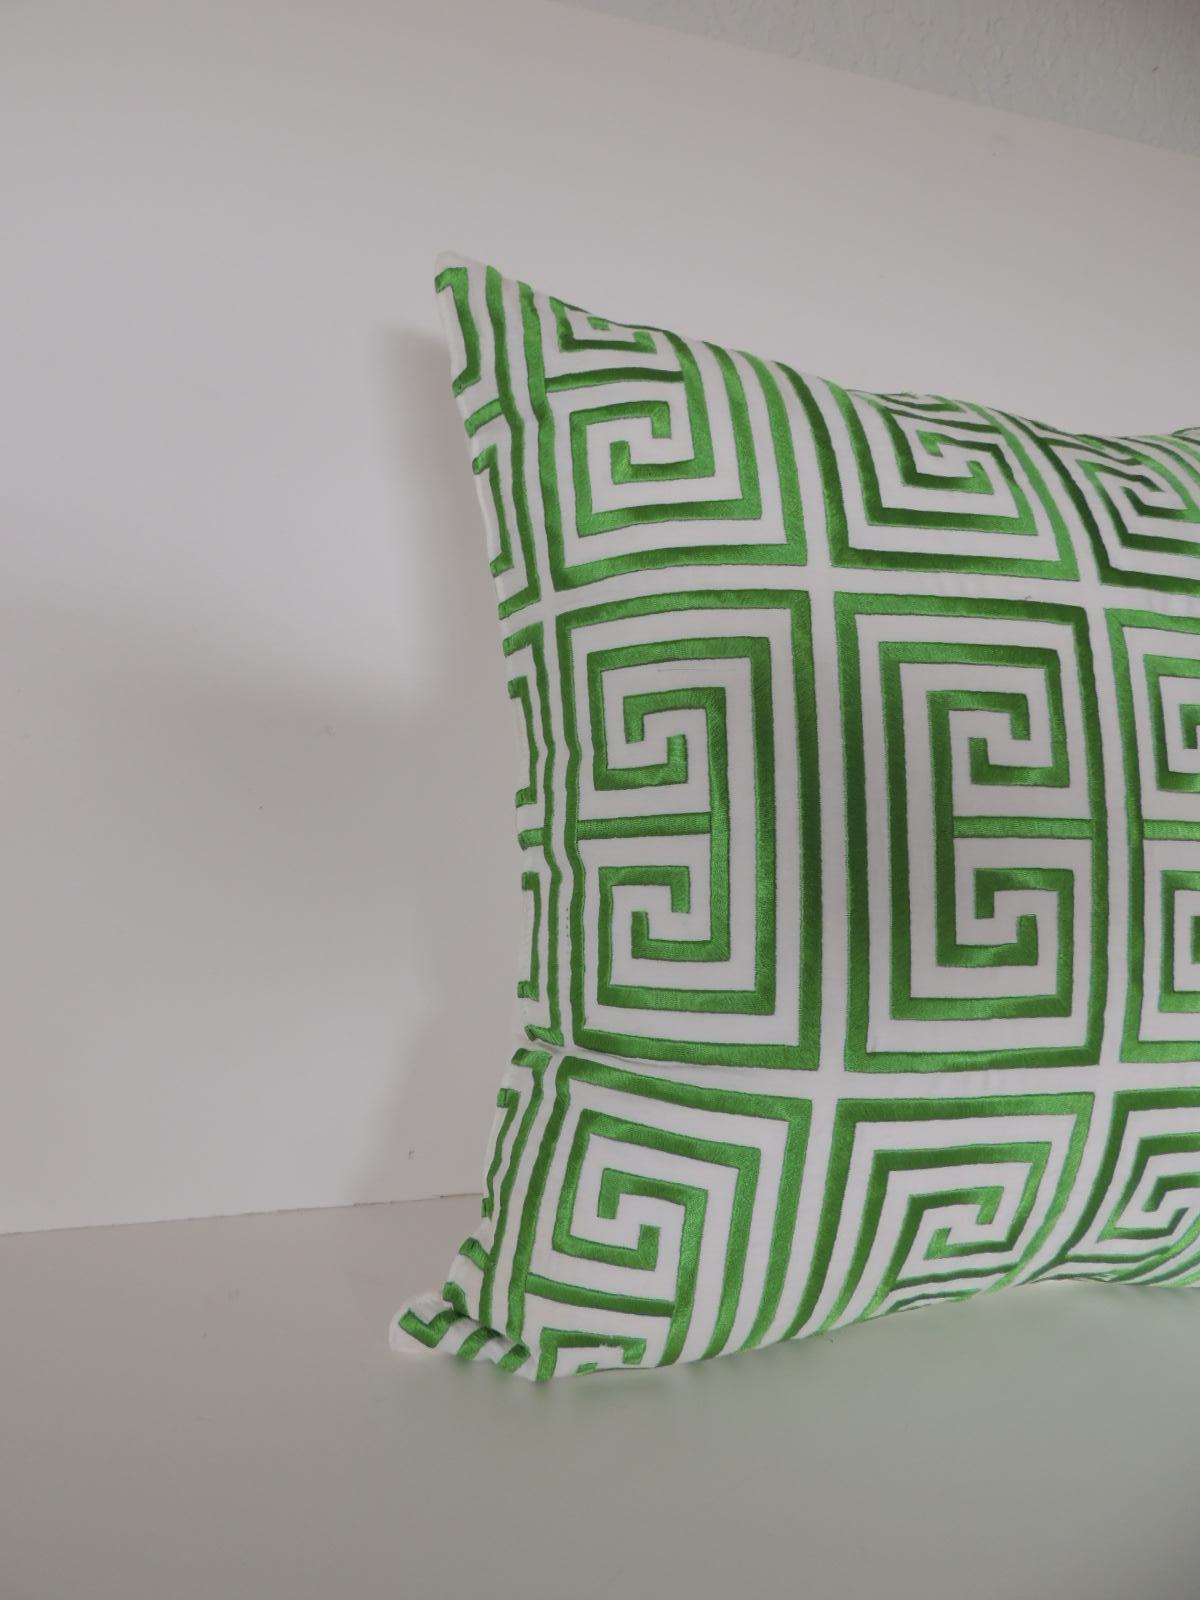 Trina Turk Trellis green and white decorative pillow.
Embroidered silk square pillow with zipper closure and feather/down insert,
Size: 20 x 20 x 6.